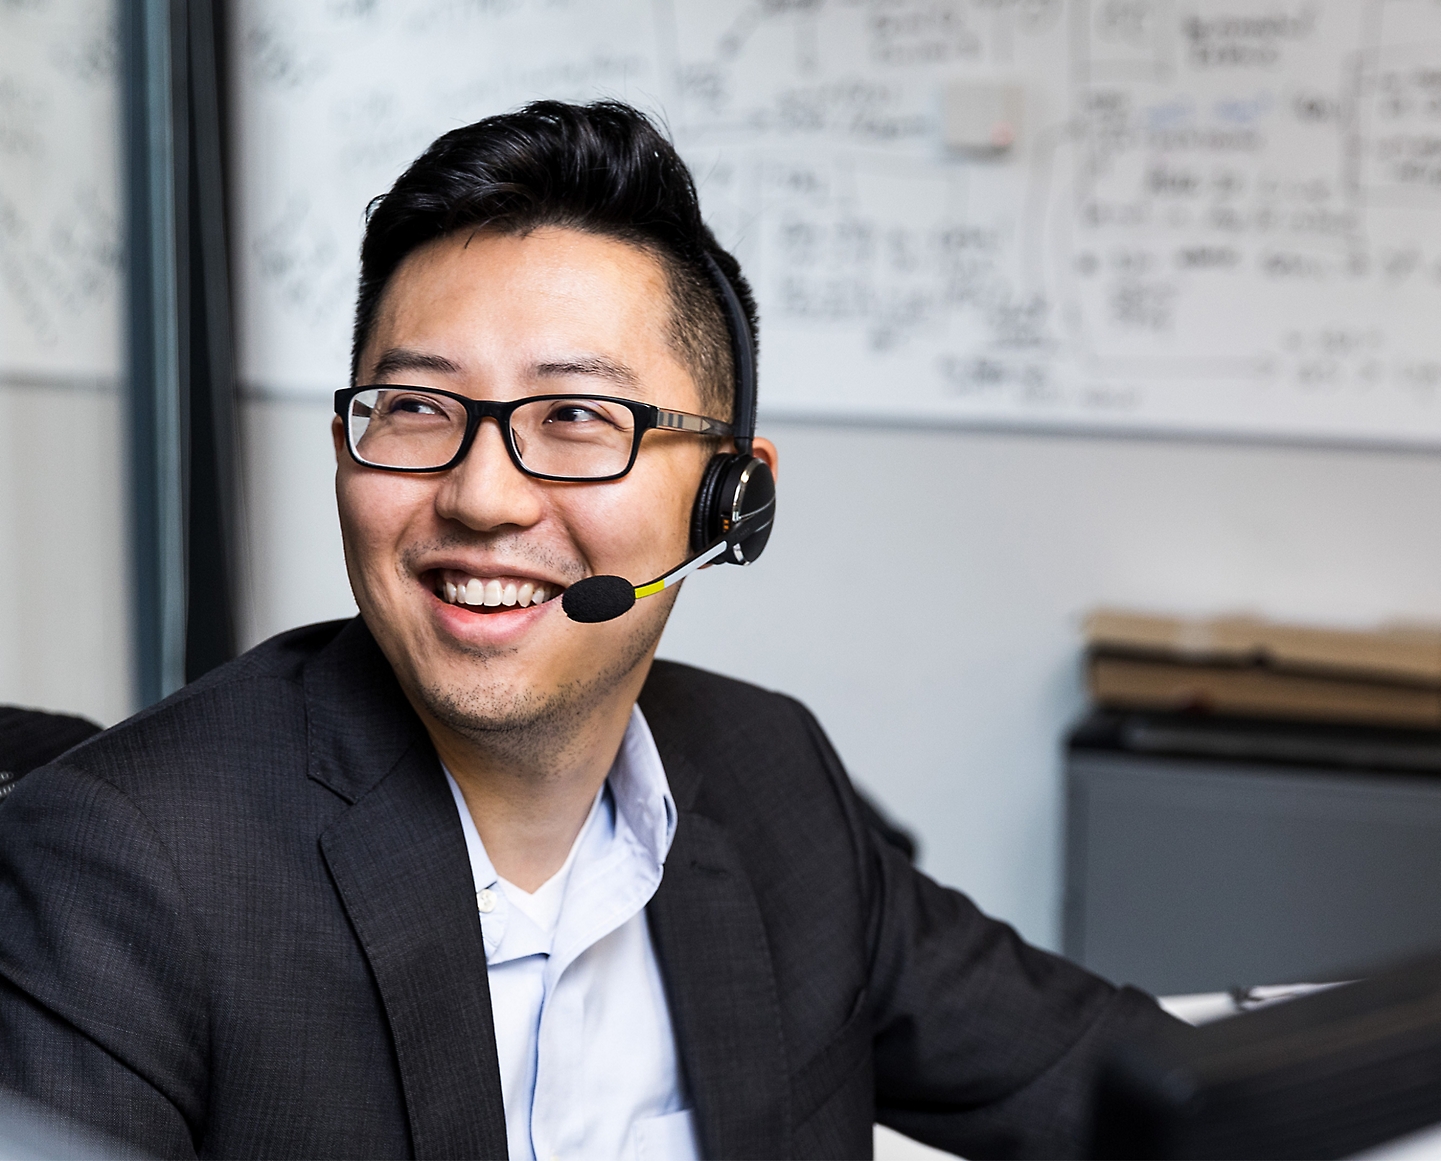 A person wearing spectacle smiling and using headphones